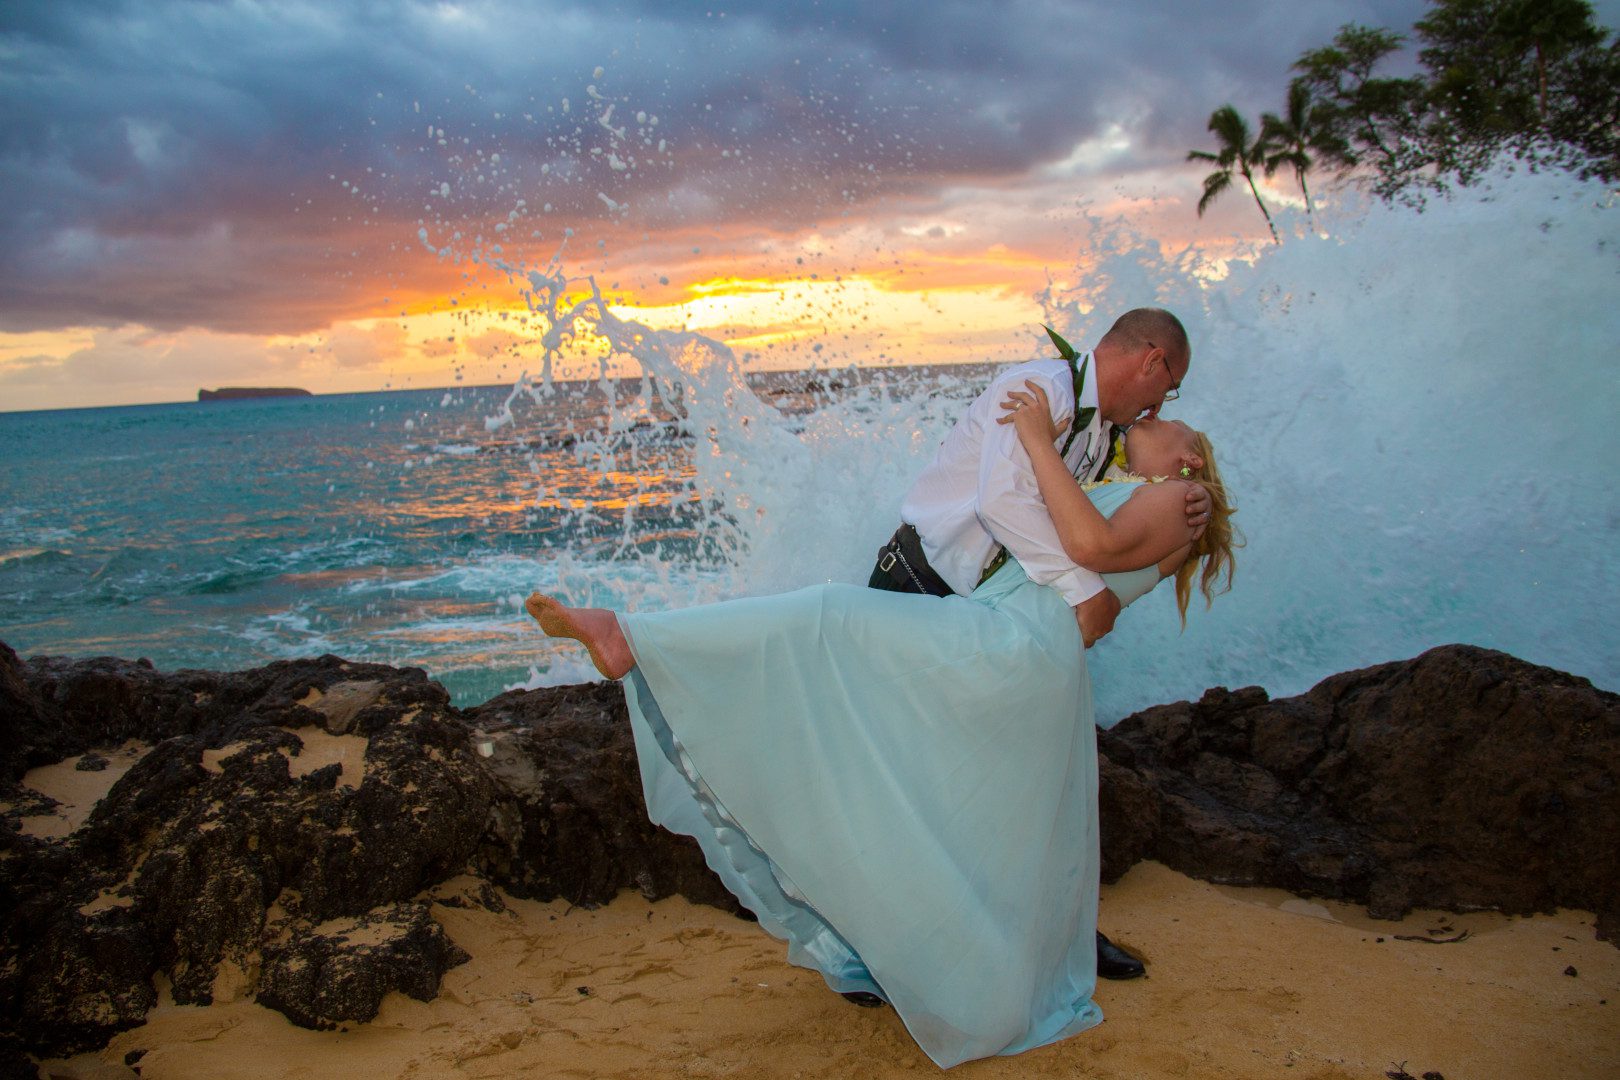 Awesome Couple Photo With Water Waves In The Background